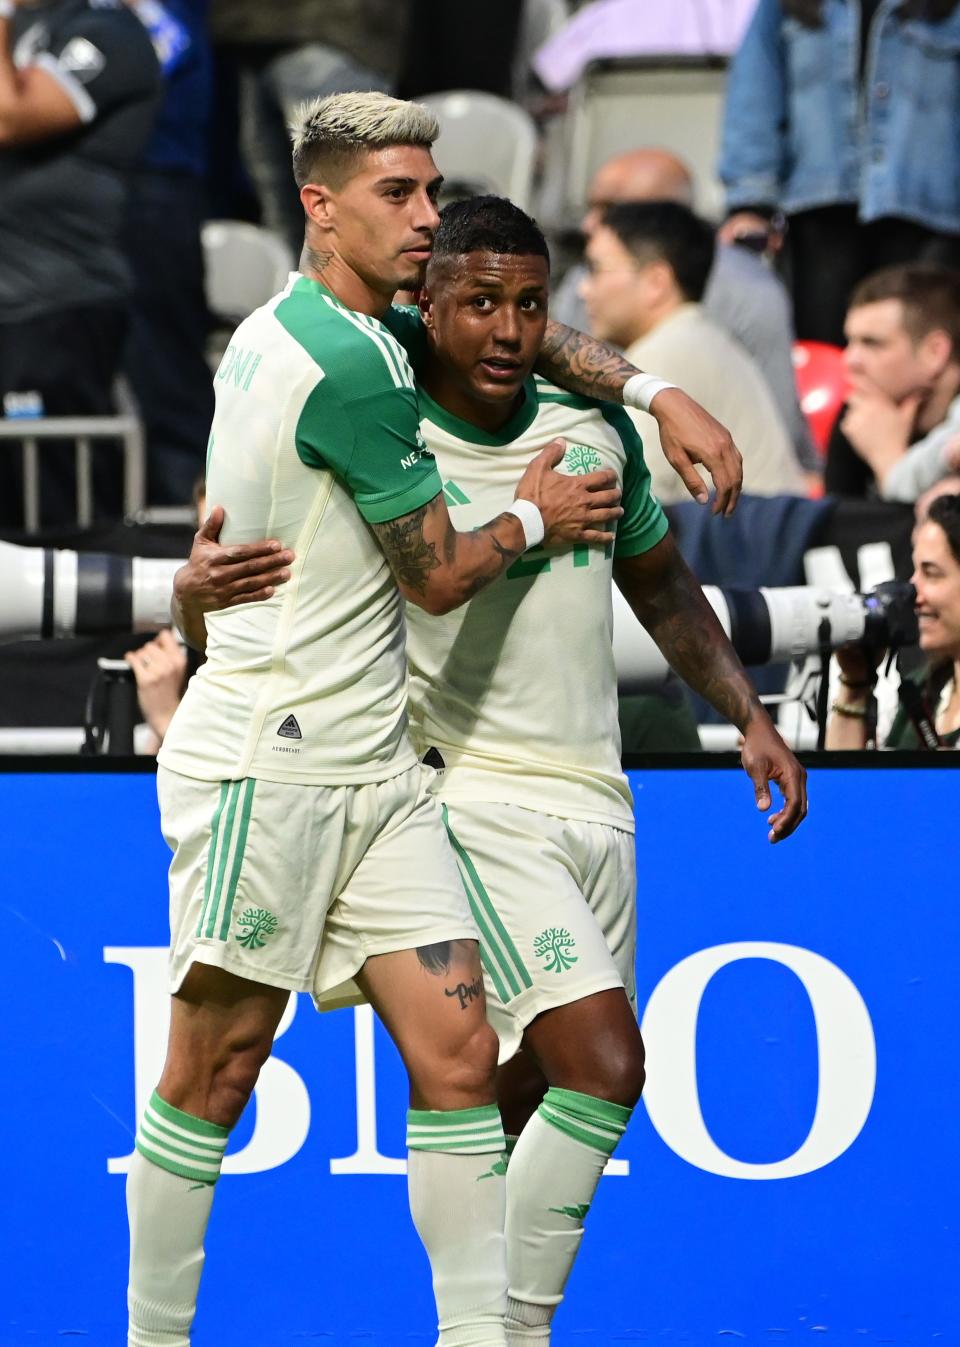 Austin FC midfielders Emiliano Rigoni and Jhojan Valencia react after a play in last week's draw against Vancouver. Over the past six matches, Austin FC has the second-most points earned in MLS.